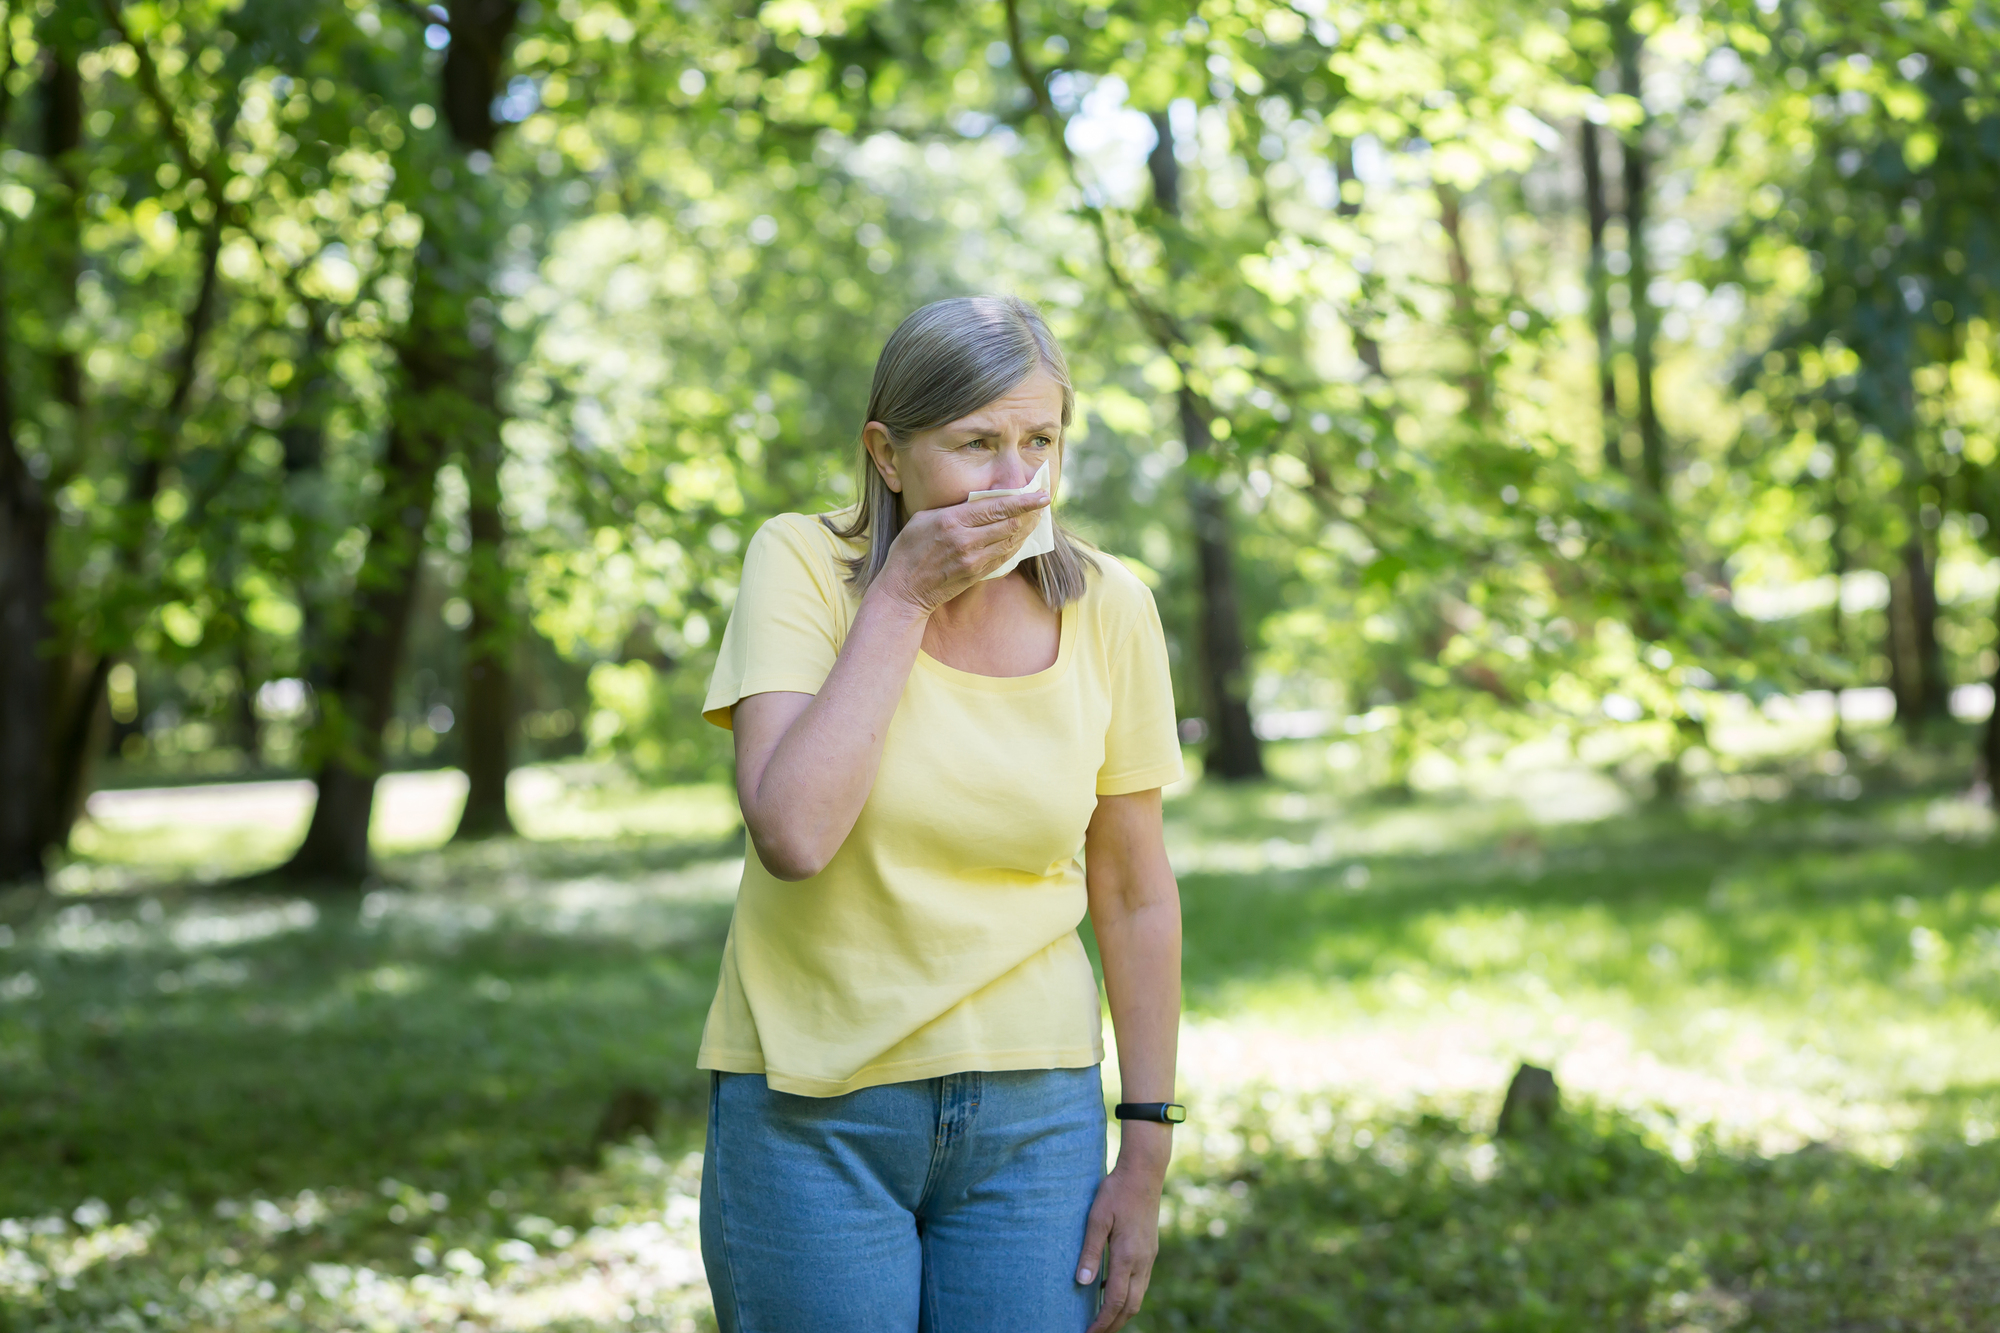 An elderly woman in the park with allergies